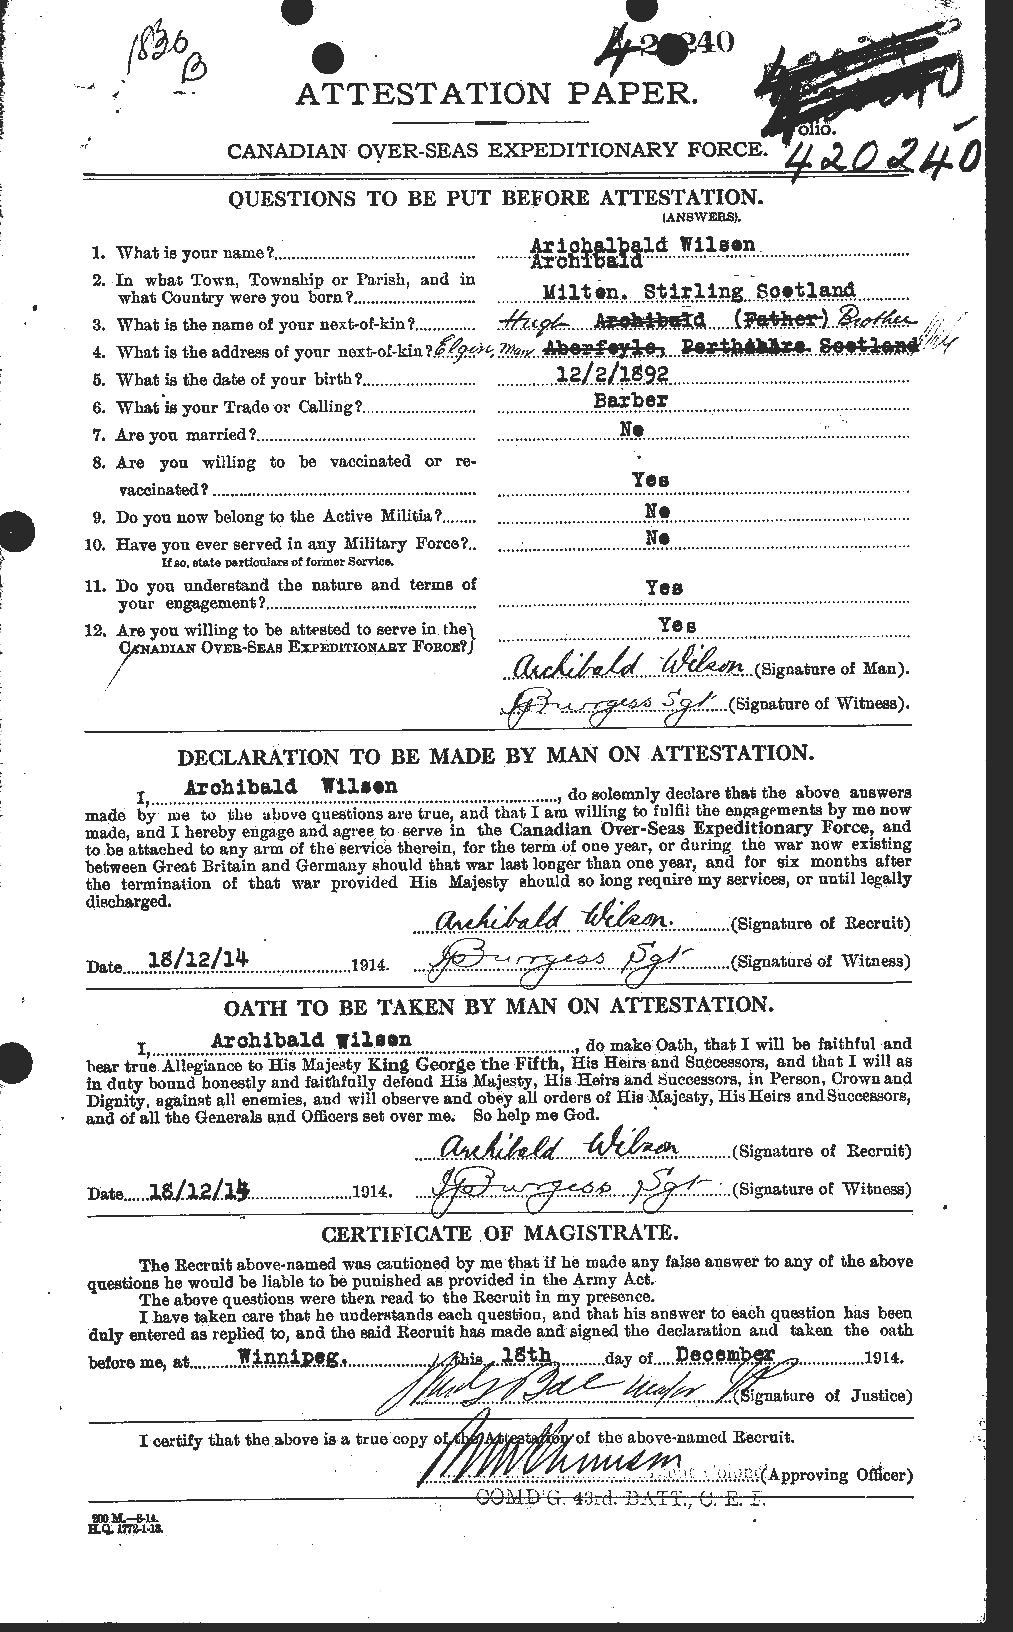 Personnel Records of the First World War - CEF 677718a